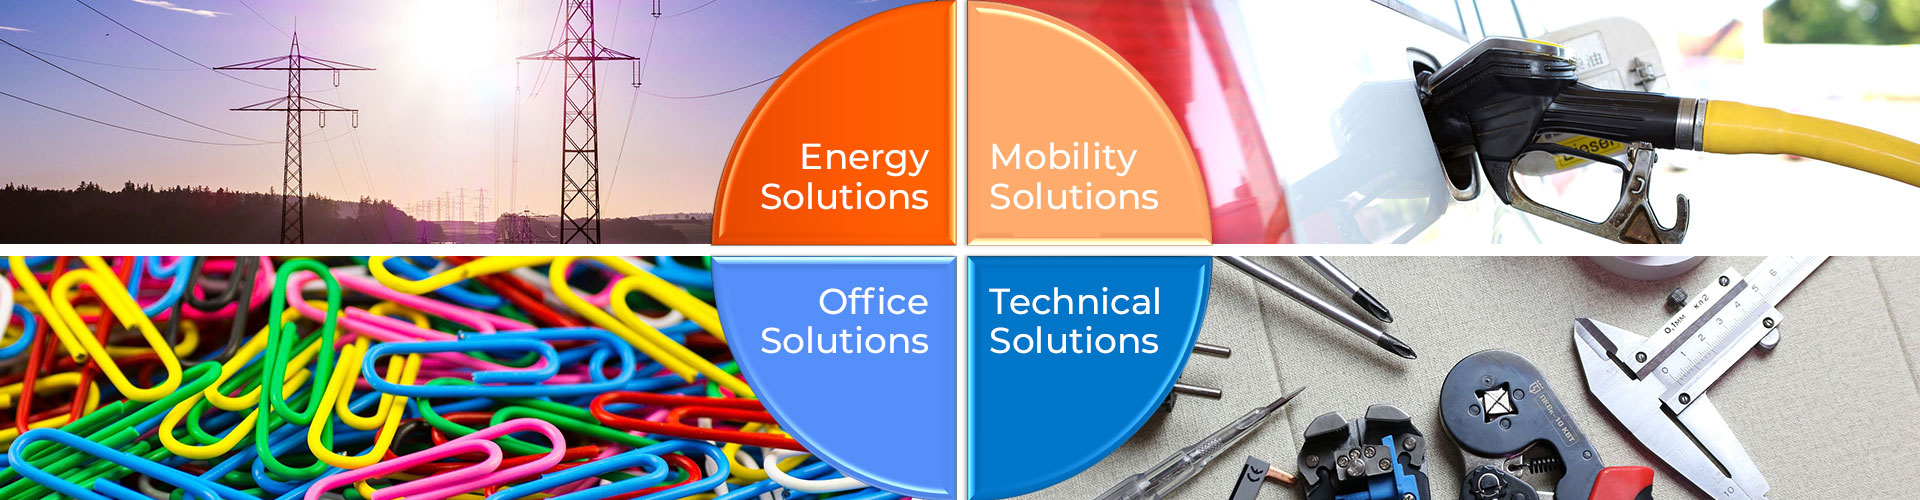 agoras Energy Mobility Office technical solutionssolutions